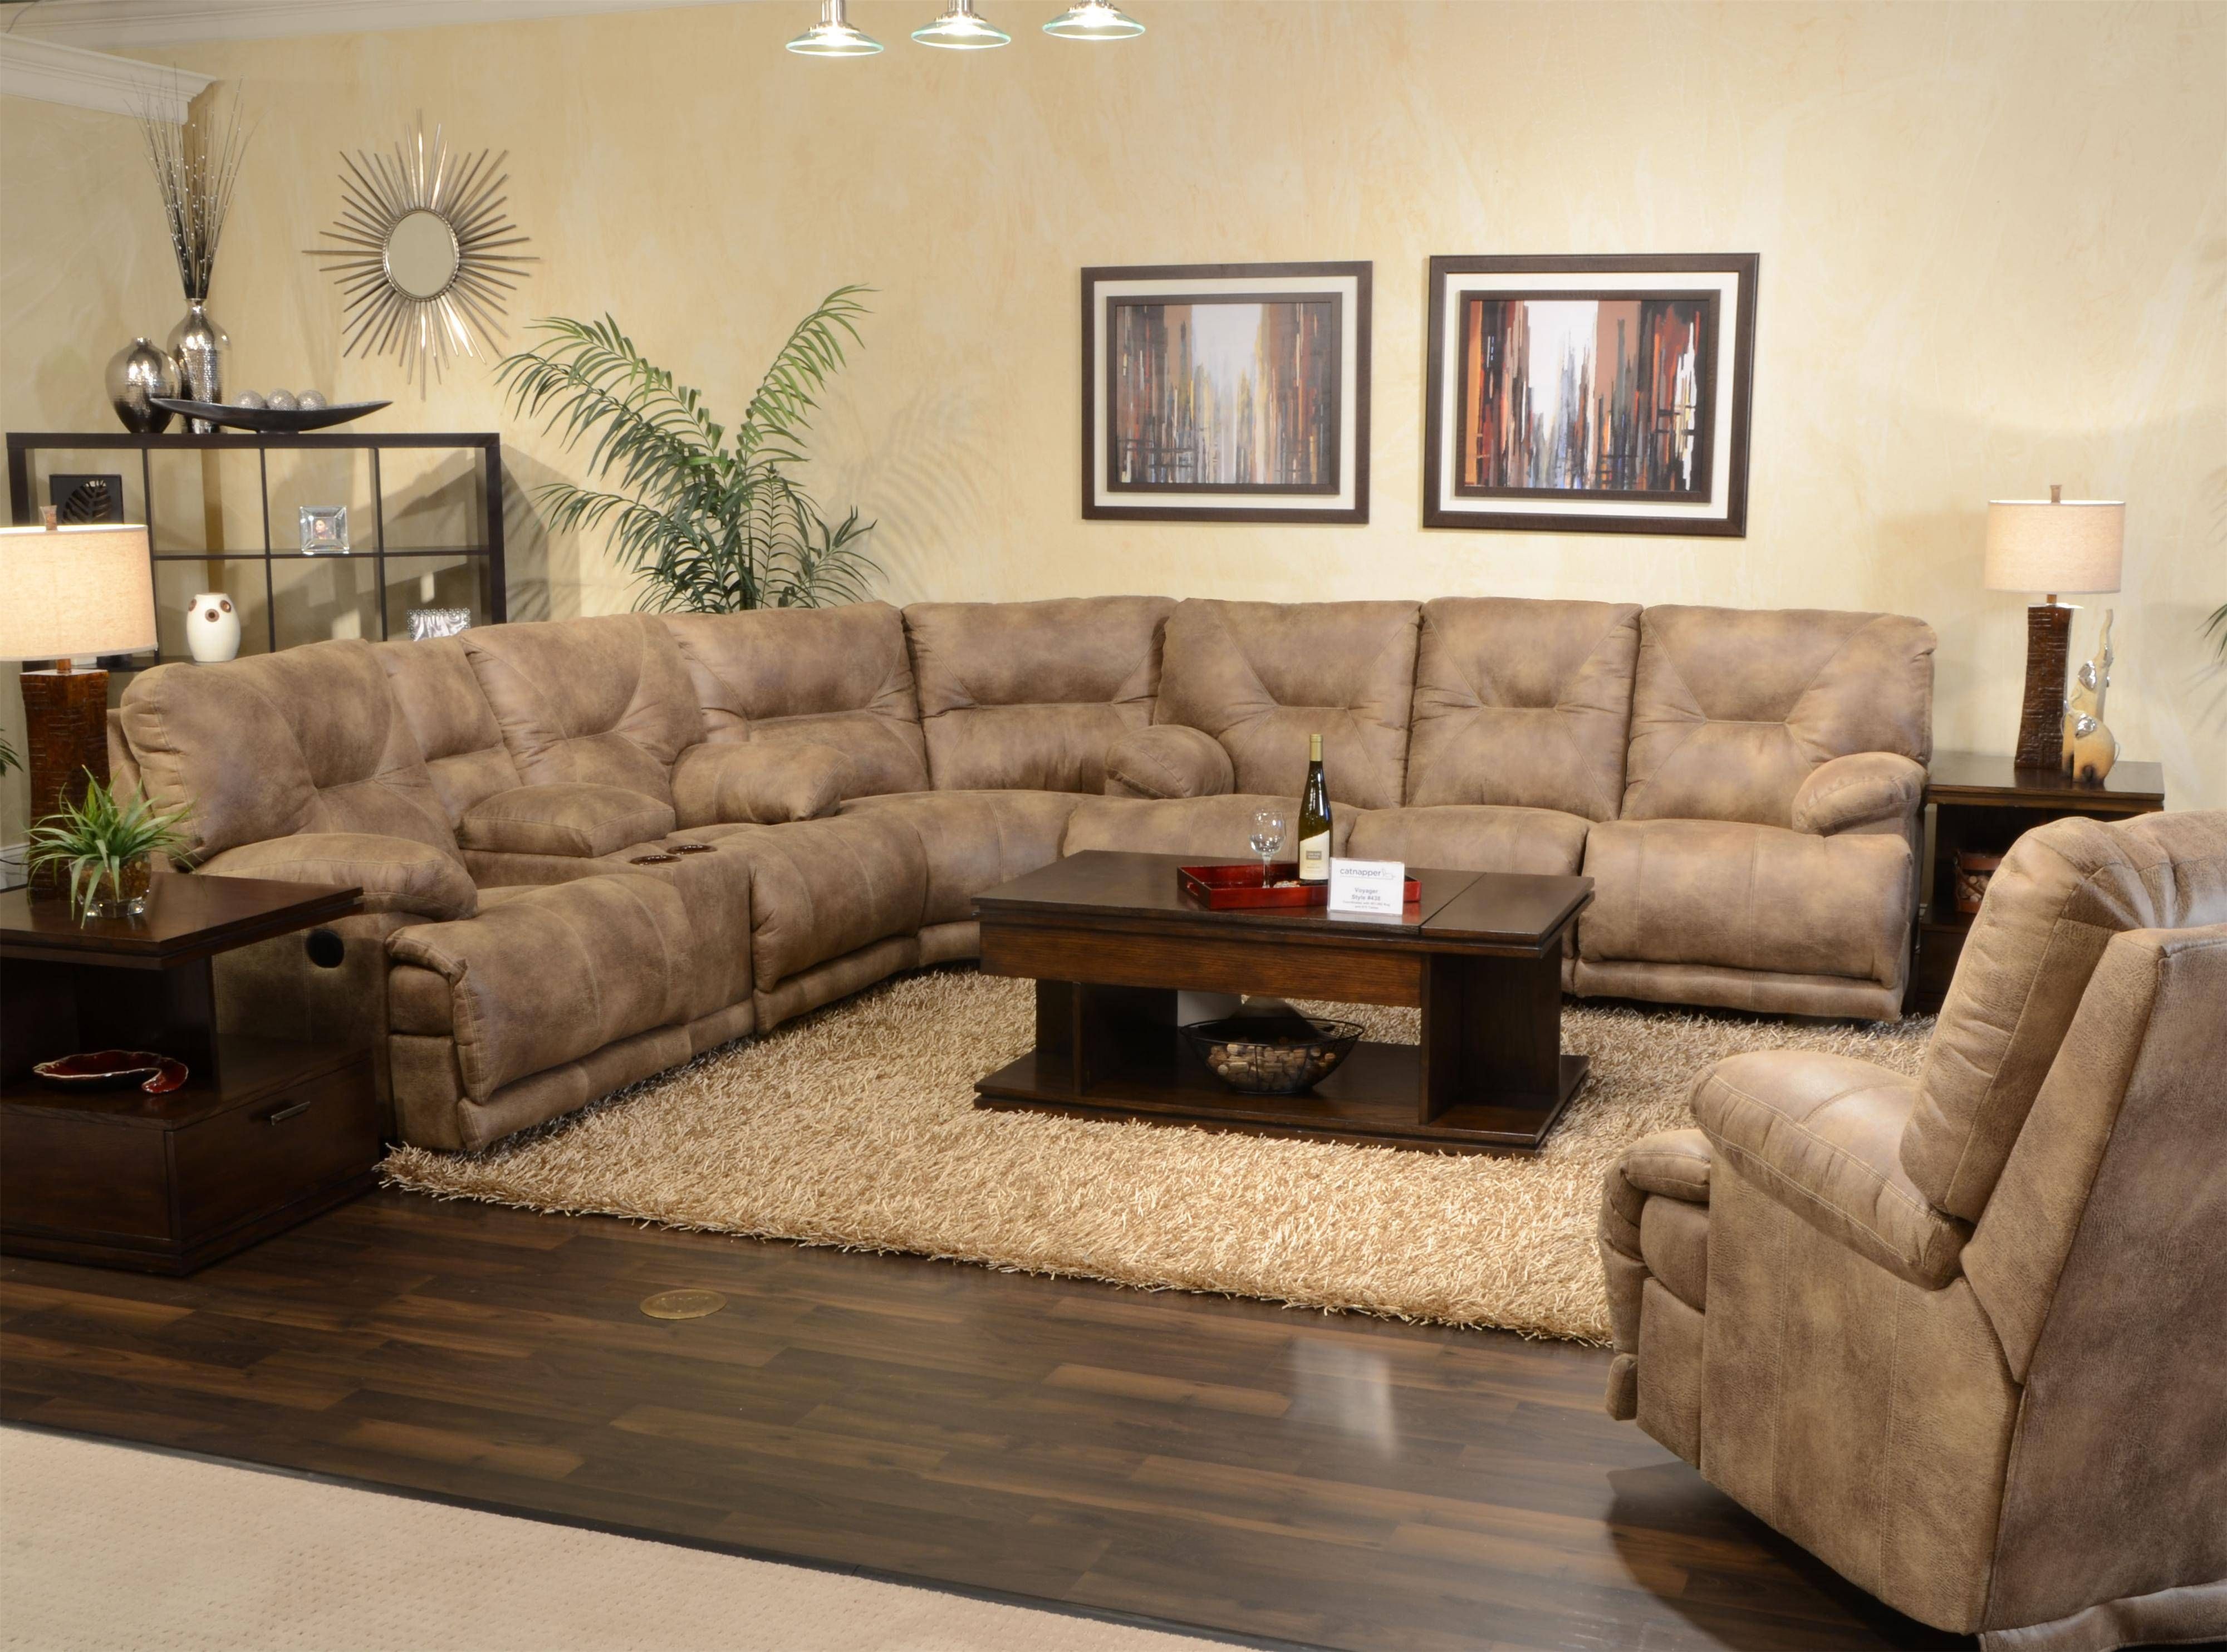 Appealing Cheap Reclining Sectional Sofas 82 About Remodel Home Intended For Theatre Sectional Sofas 